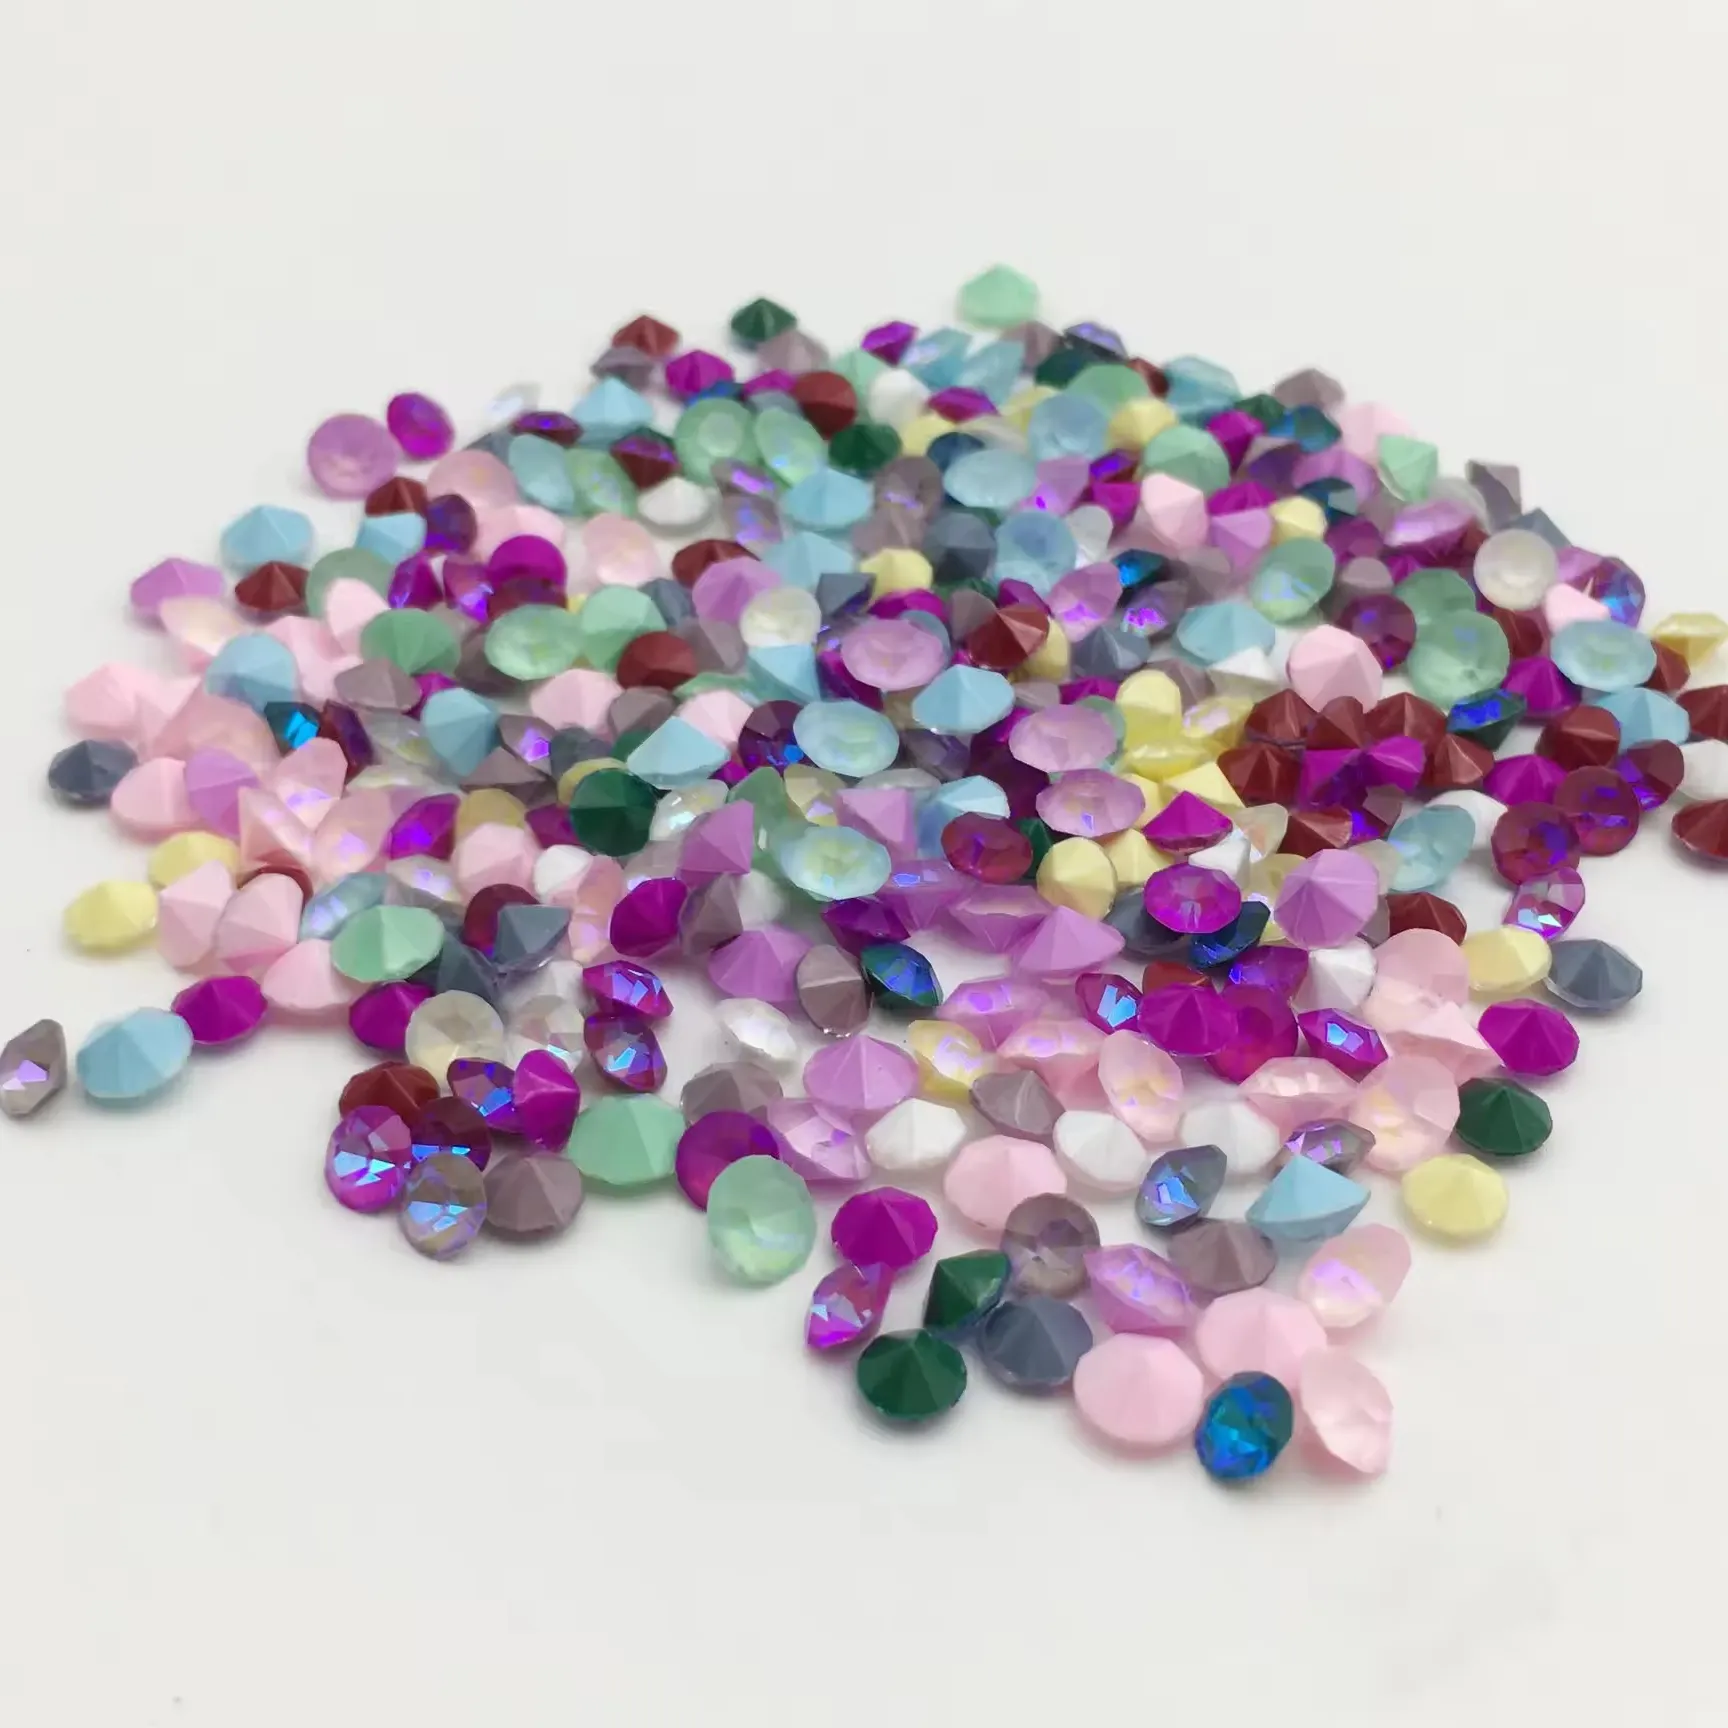 Colorful Loose Glass Diamonds Mocha AB Rhinestones for DIY Ring Earrings Hairpin Shoes Bags Garments with round Shape Accessory